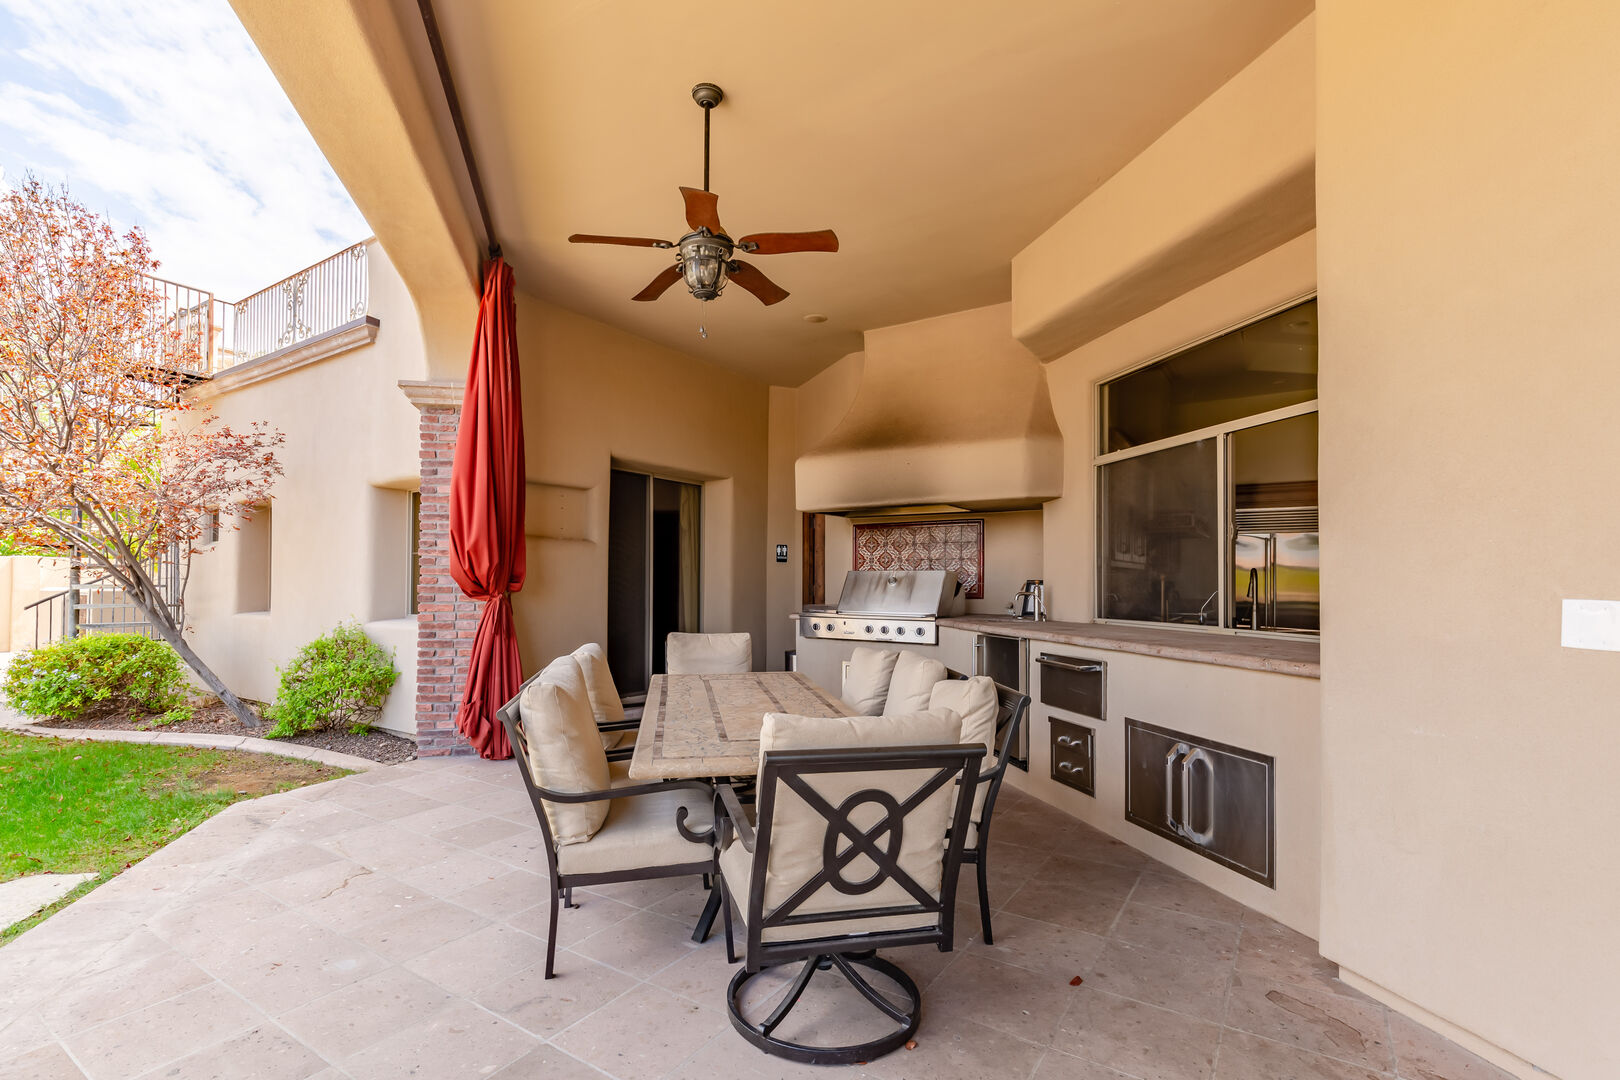 Covered backyard patio offering outdoor dining, and a built-in BBQ / outdoor kitchen area.